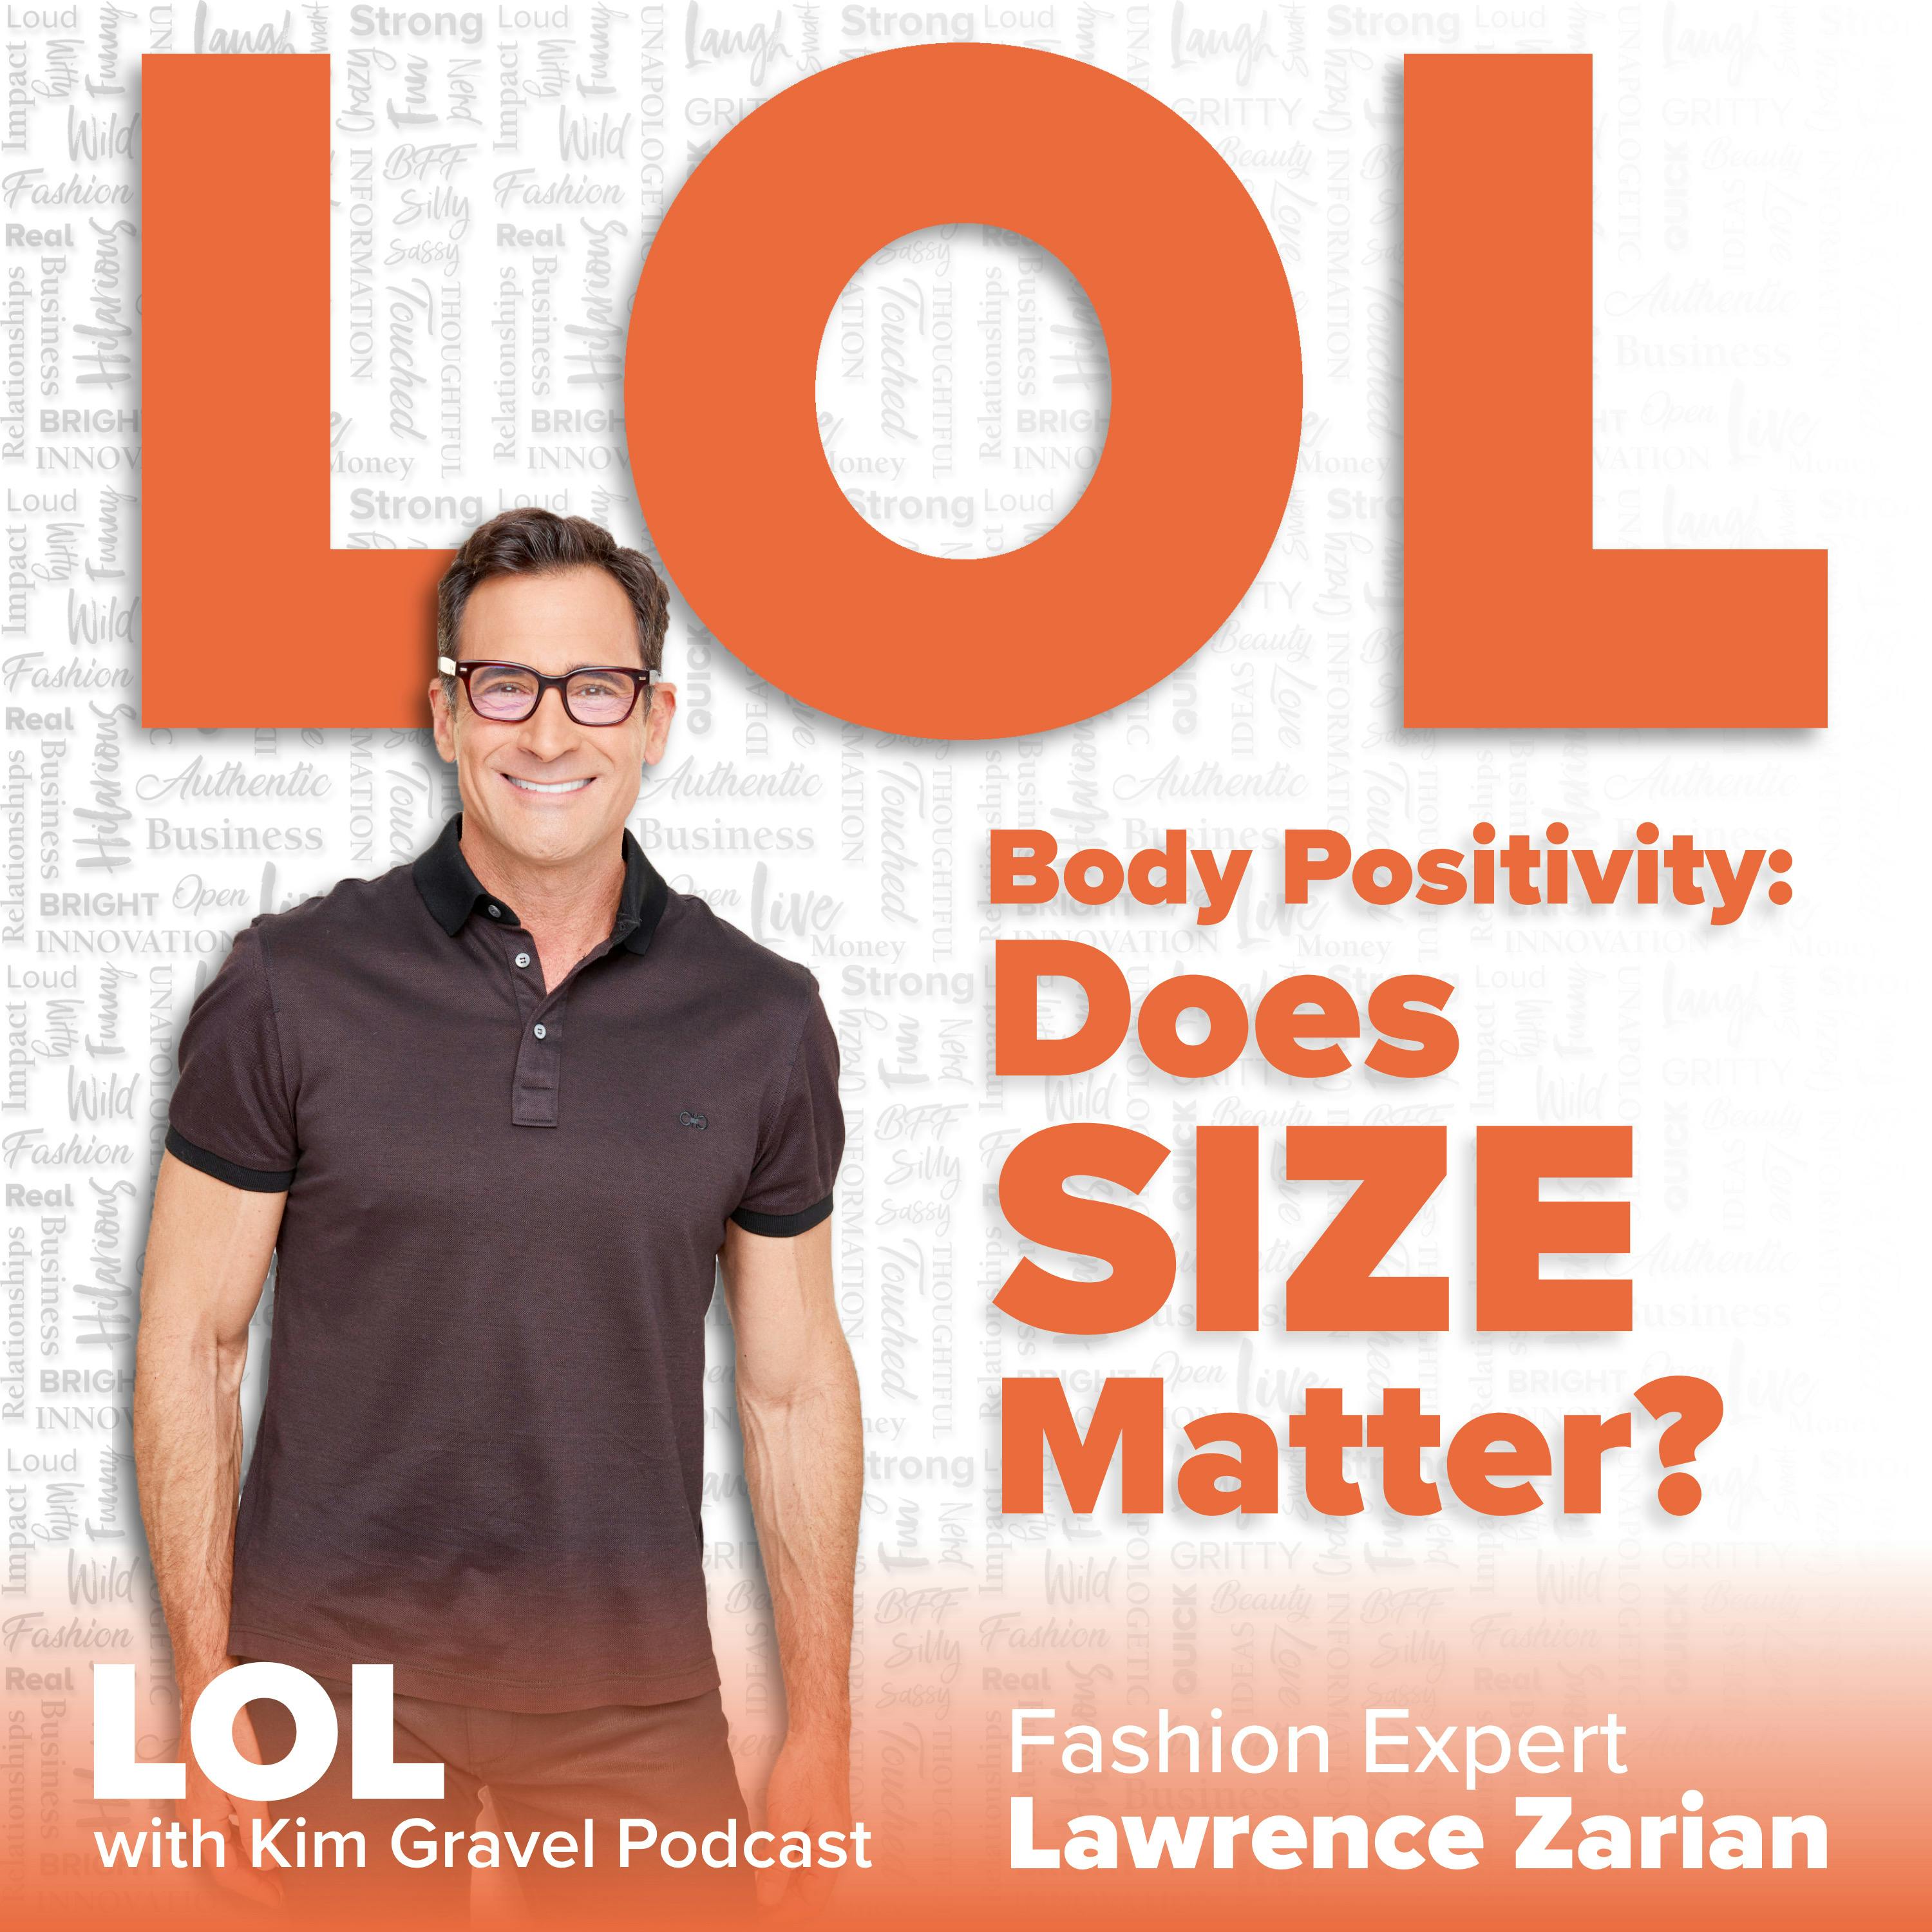 Body Positivity: Does Size Matter? with Lawrence Zarian Image